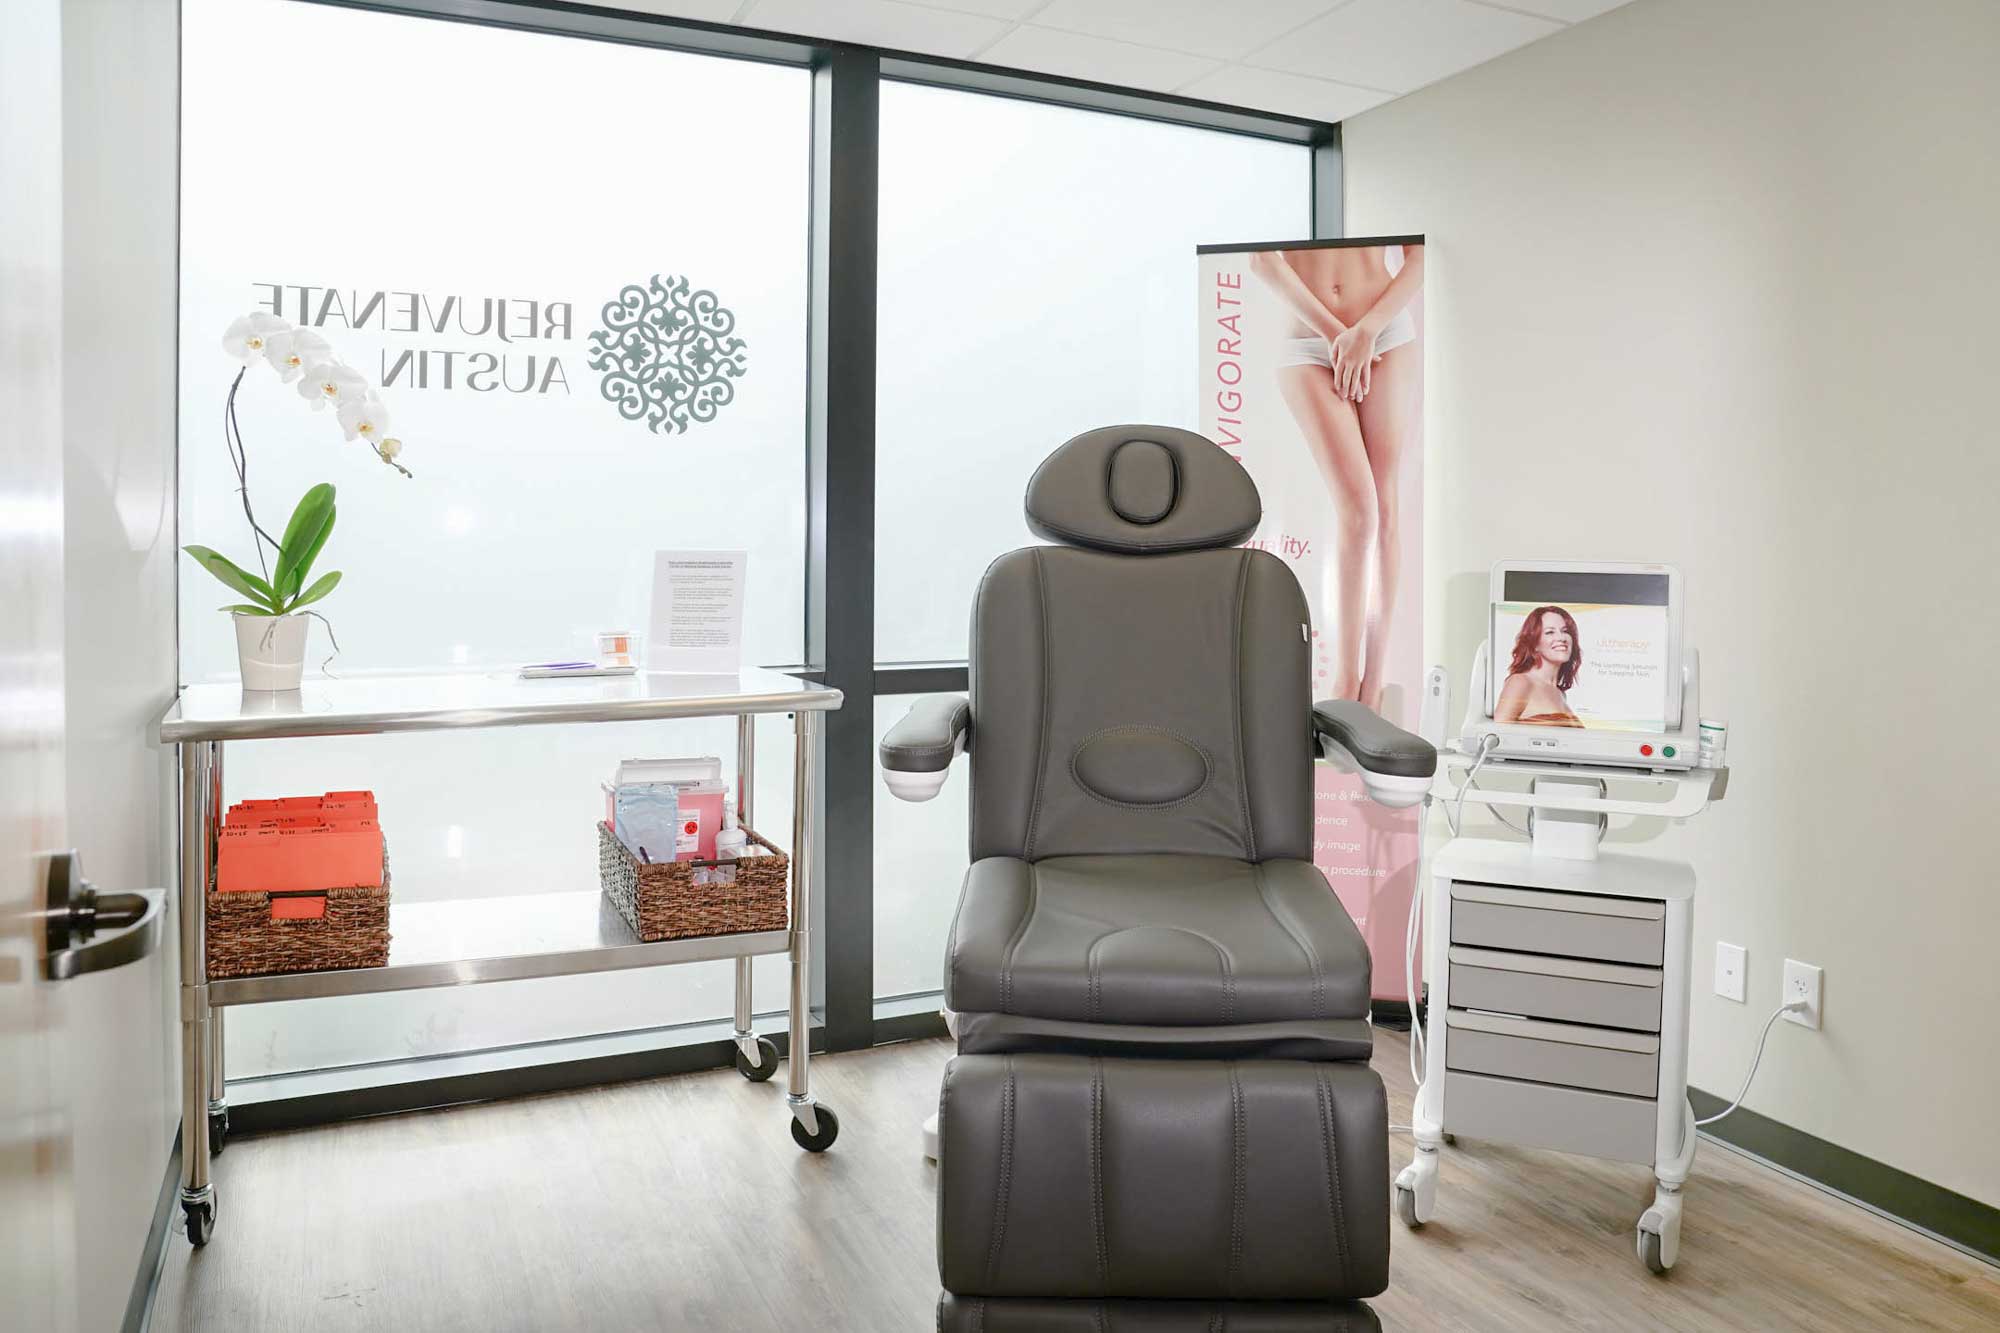 vaginal rejuvenation room with a chair